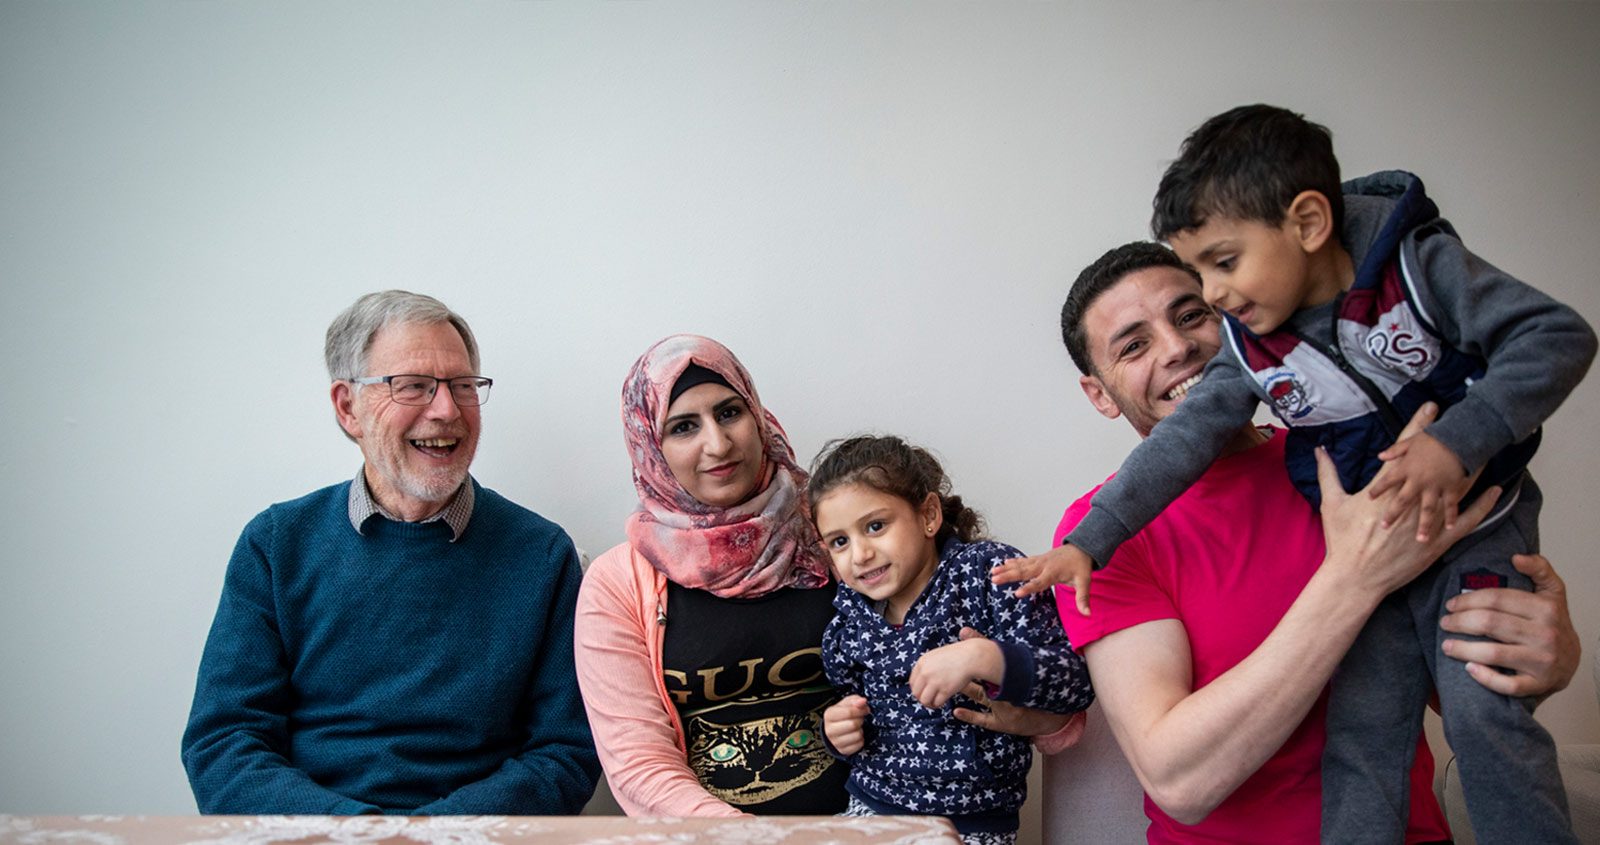 A family from Syria - two parents and two children - with an elderly gentleman, sitting around a table laughing as the boy climbs onto his dad's lap.